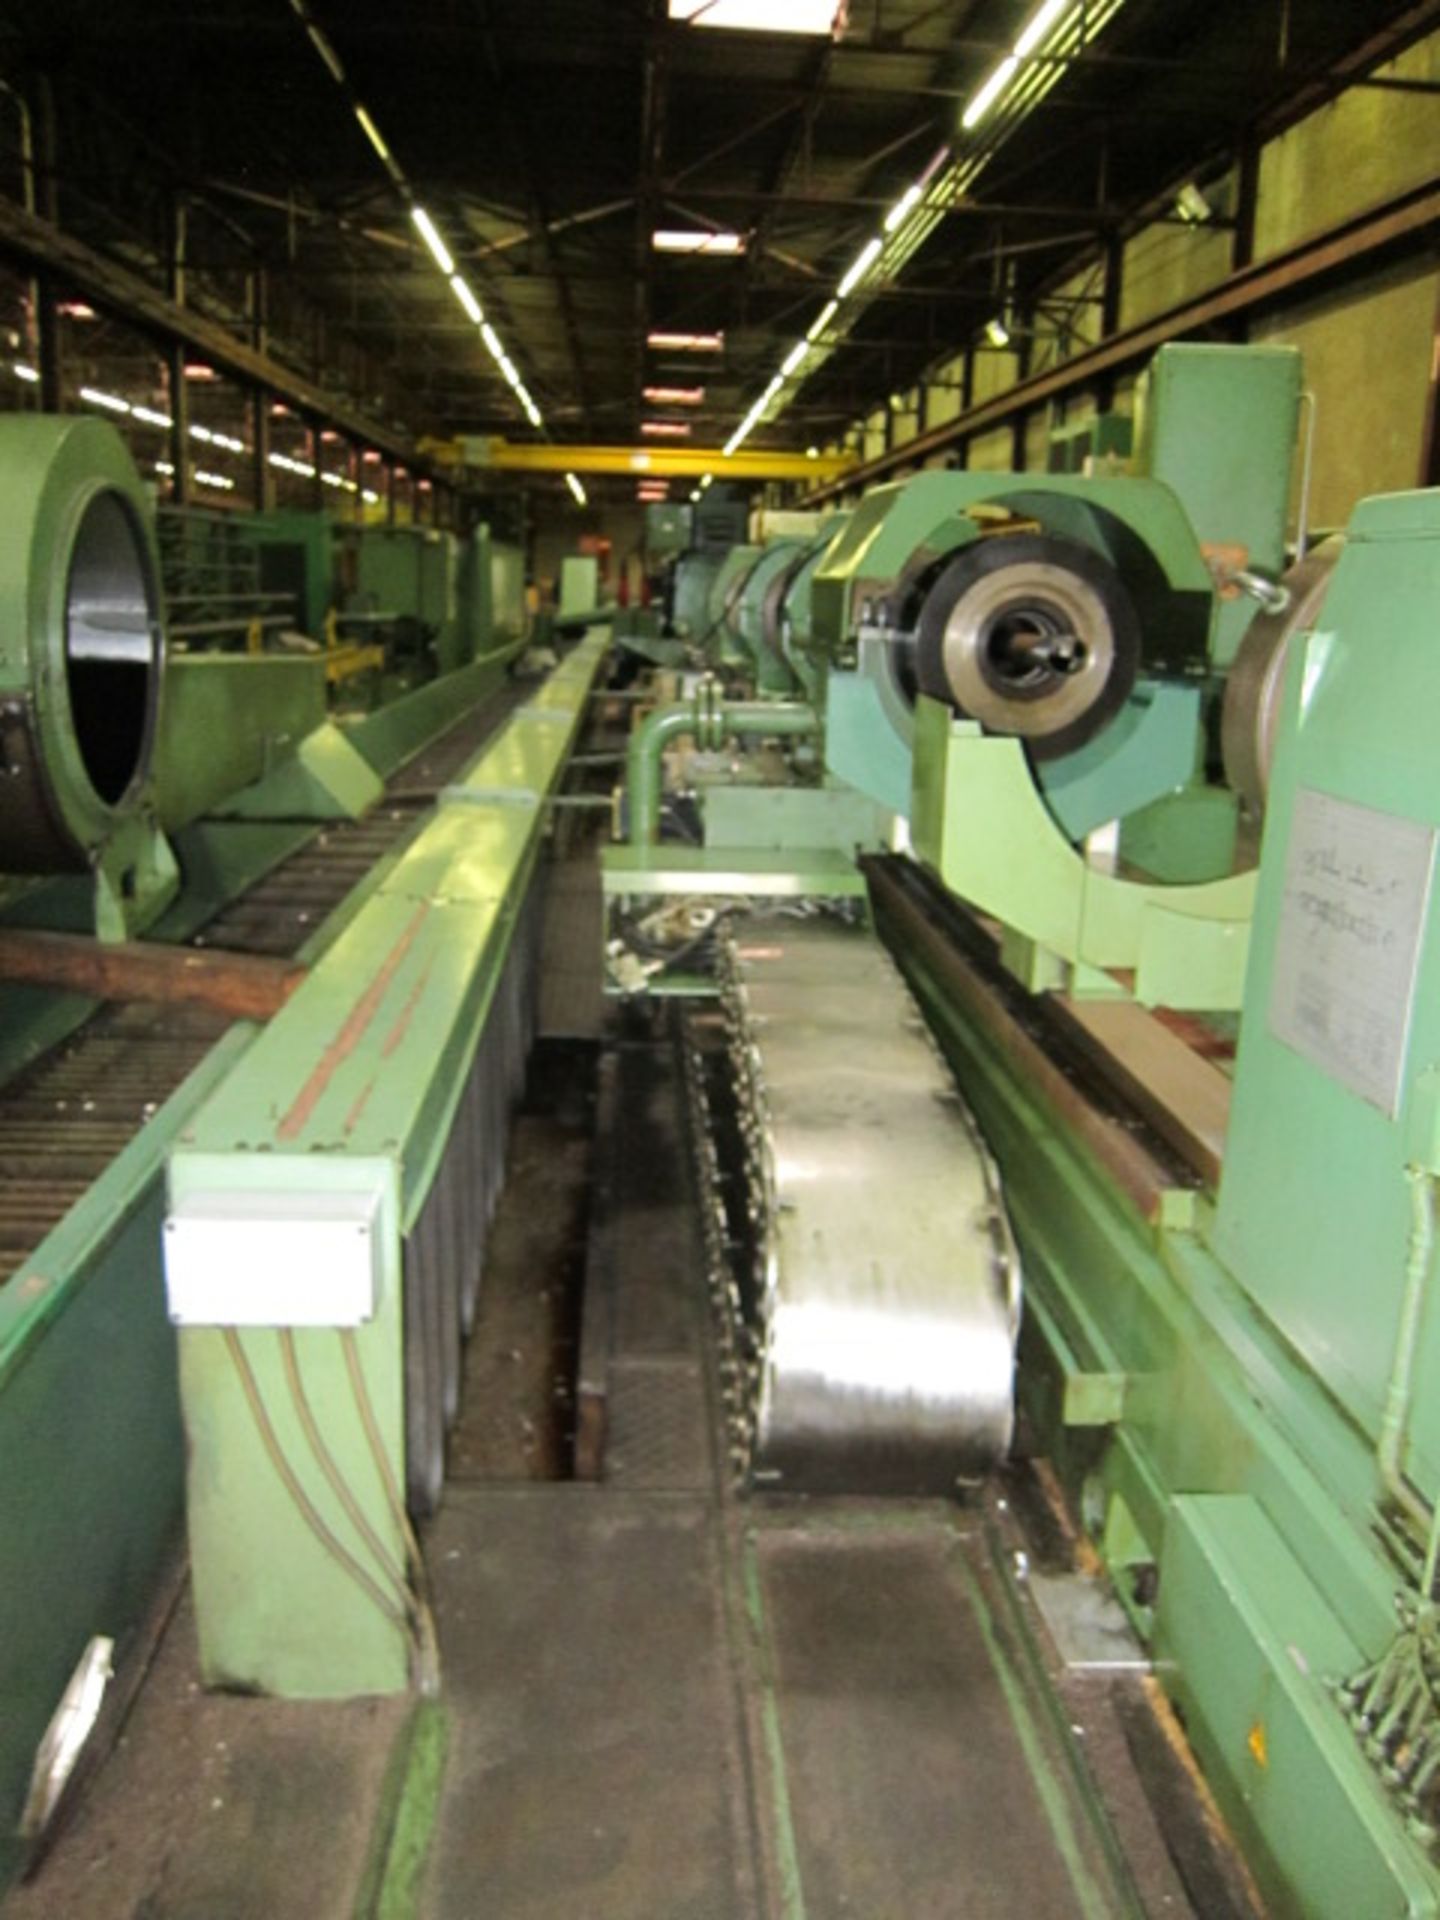 COUNTER ROTATING DEEP HOLE BORING MACHINE, WOHLENBERG MDL. PB2-1000 X 11M, new 1988, 39.37” sw. over - Image 19 of 31